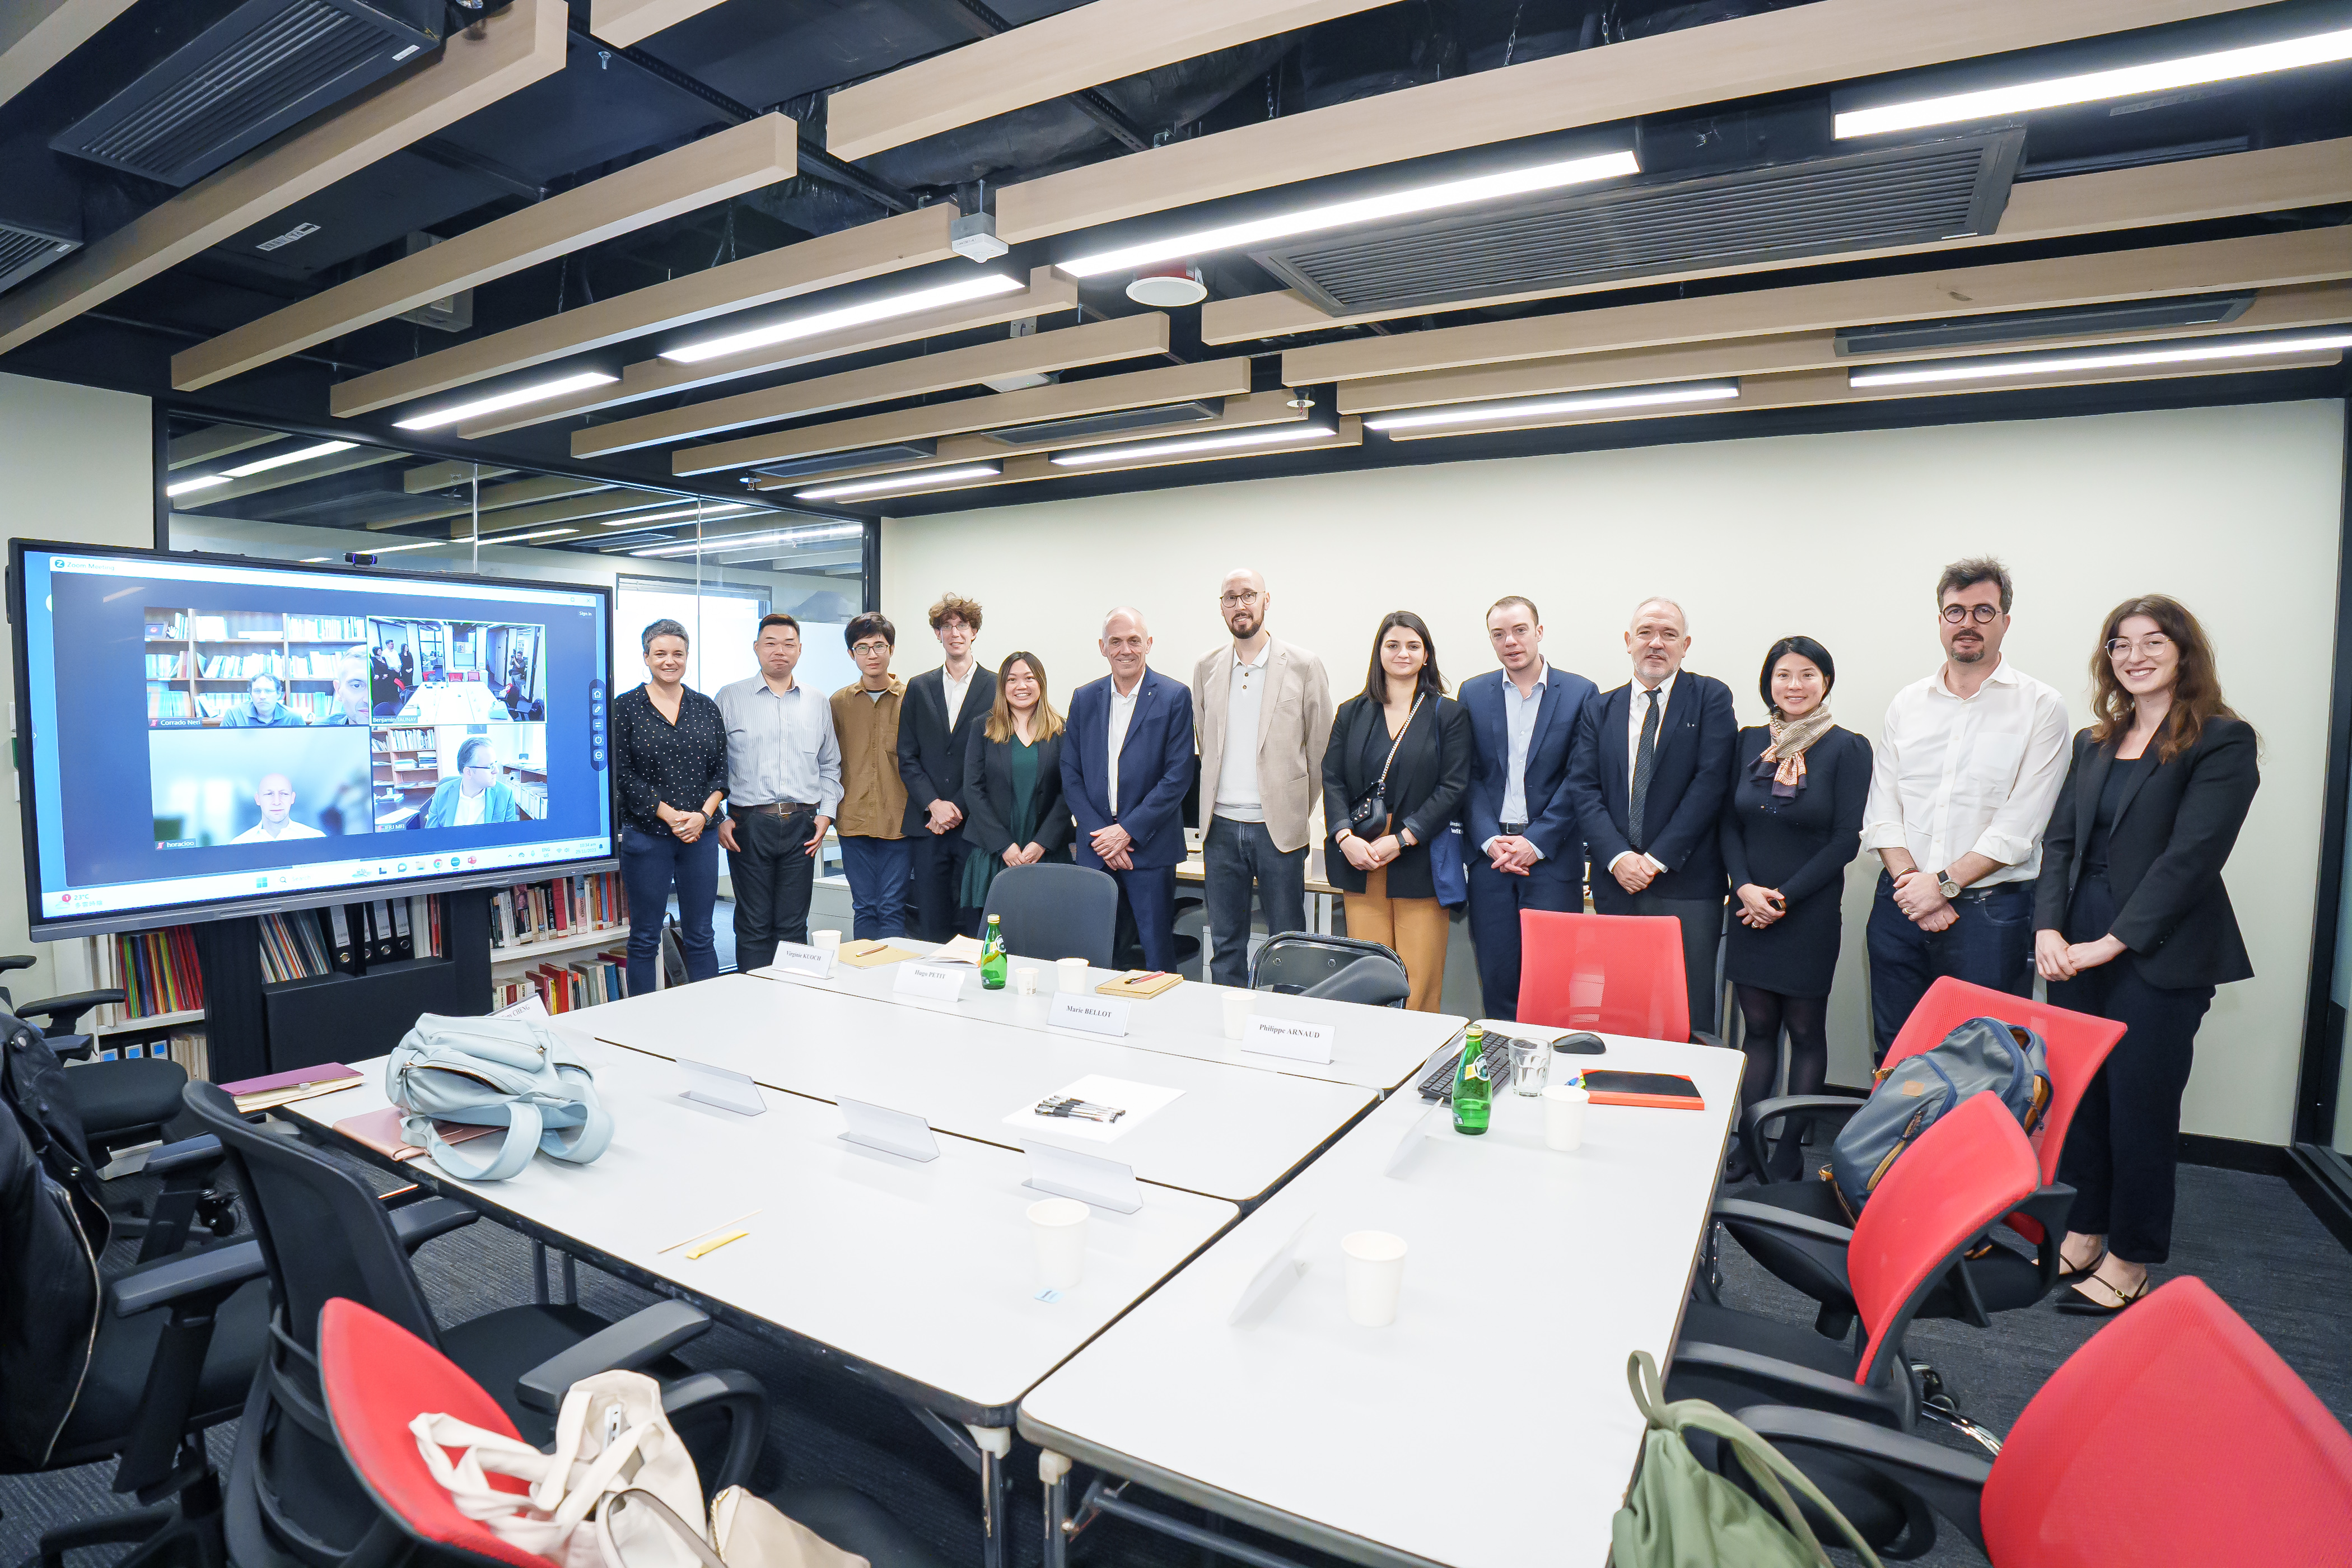 Delegation from the French National Center for Scientific Research (CNRS) visited The French Centre for Research on Contemporary China (CEFC).